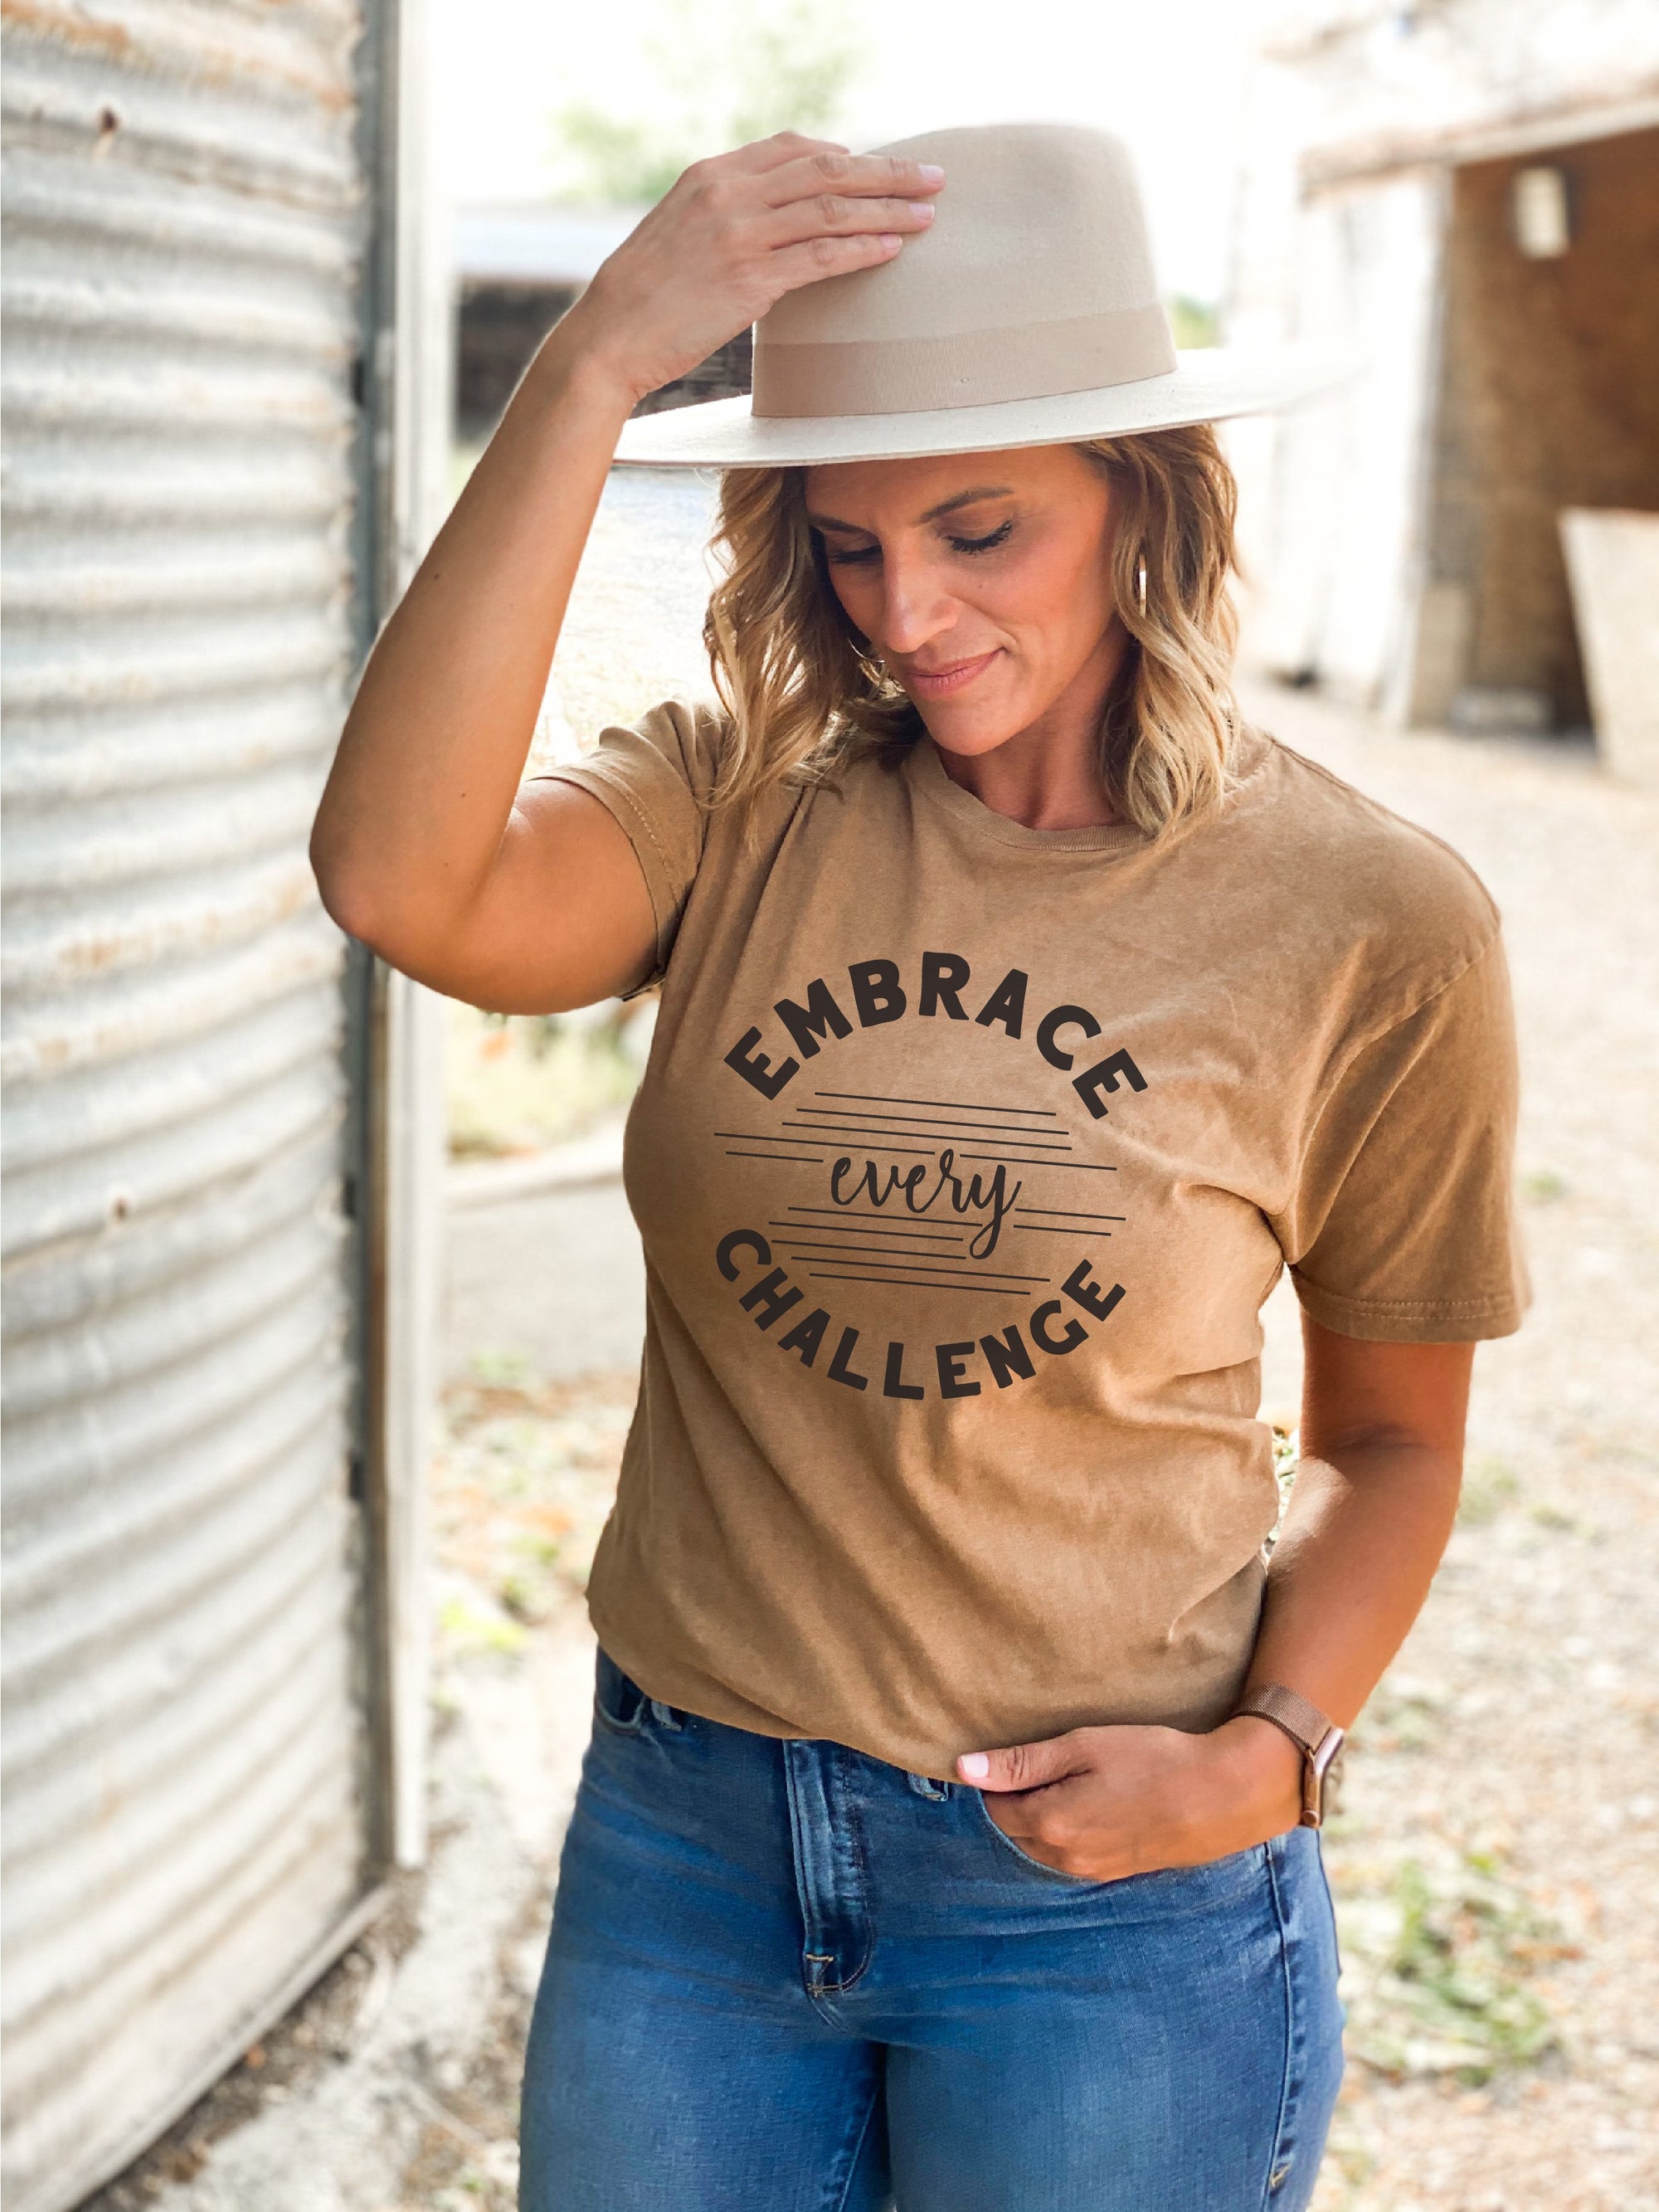 Embrace every challenge vintage wash tee Short sleeve miscellaneous tee Lane 7 15004 Camel 